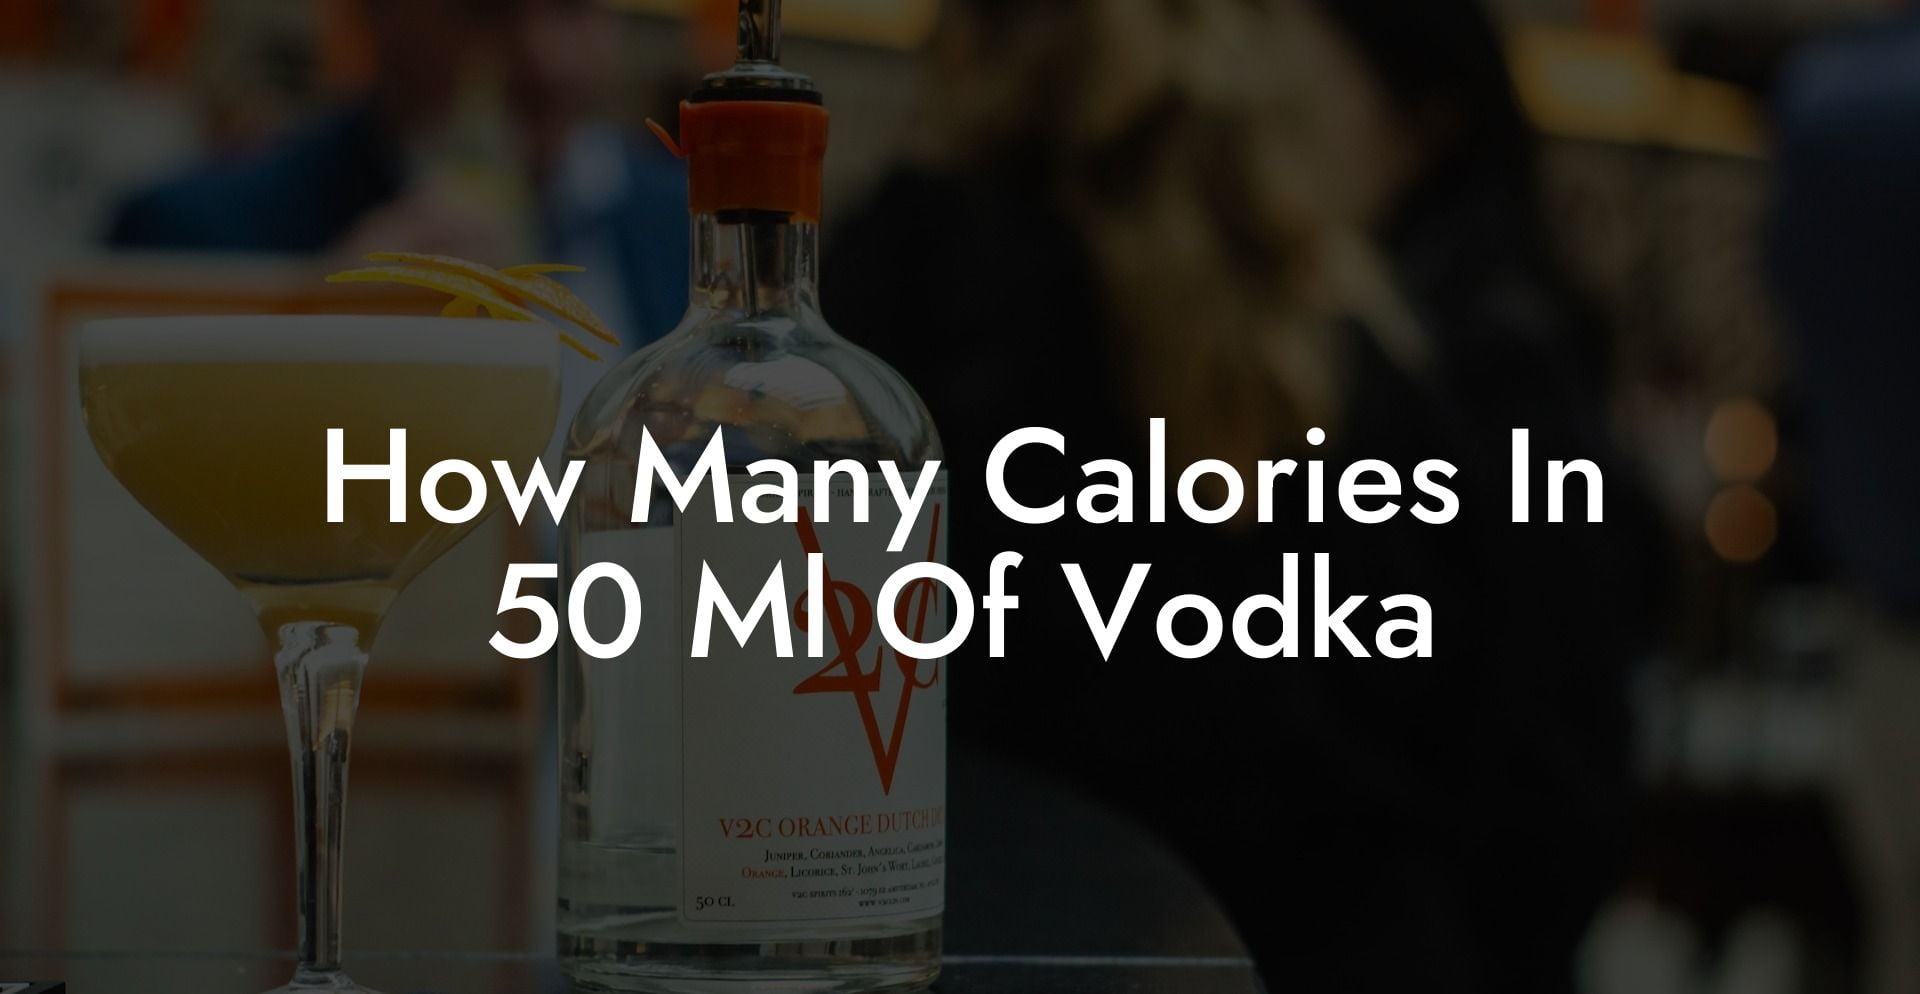 How Many Calories In 50 Ml Of Vodka